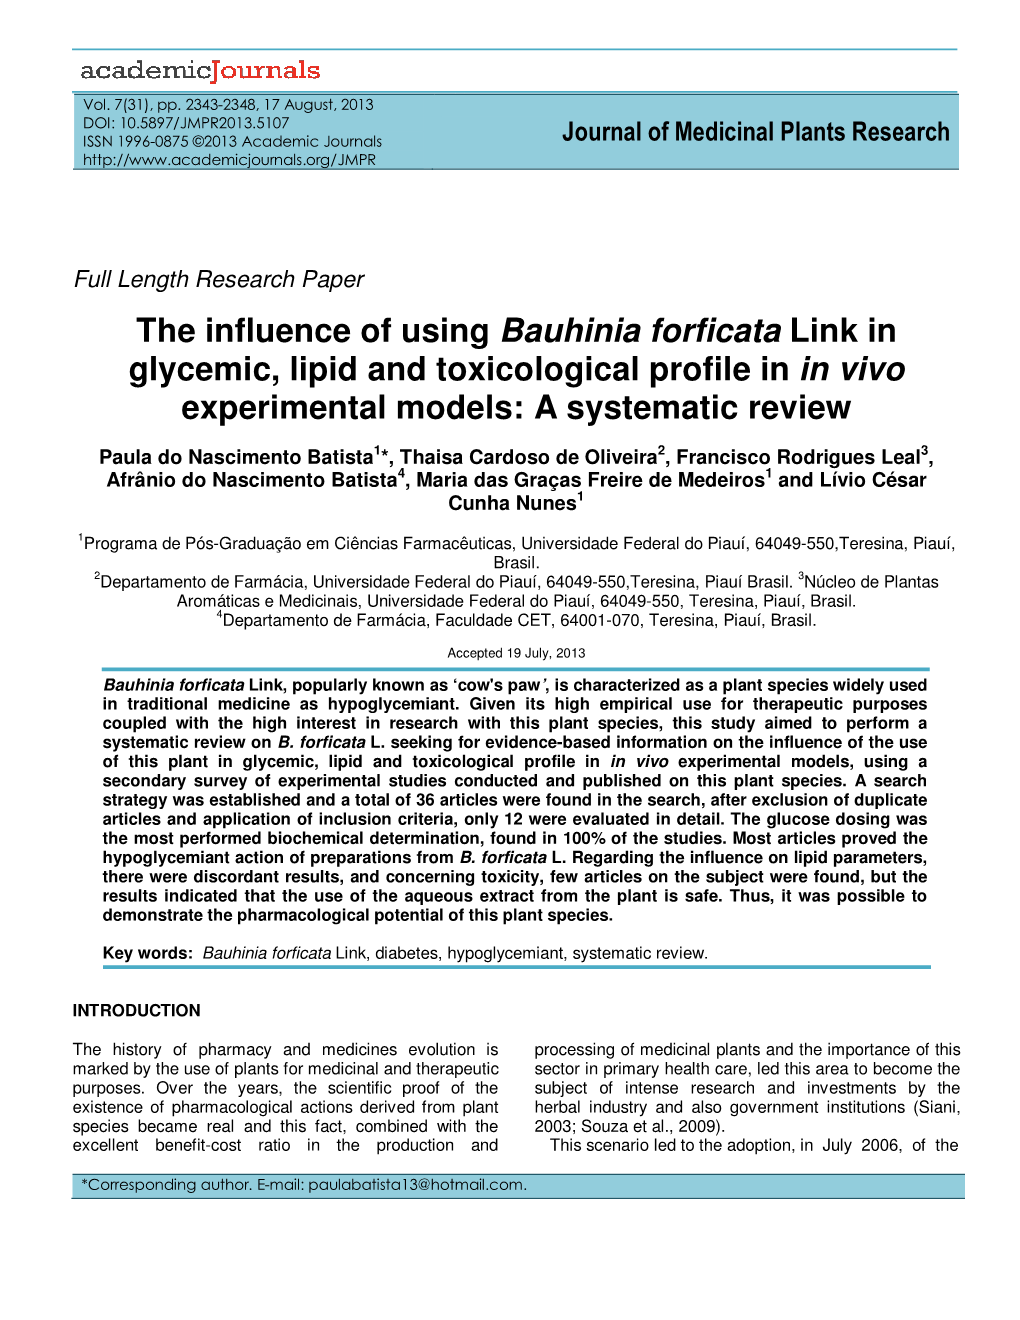 The Influence of Using Bauhinia Forficata Link in Glycemic, Lipid and Toxicological Profile in in Vivo Experimental Models: a Systematic Review